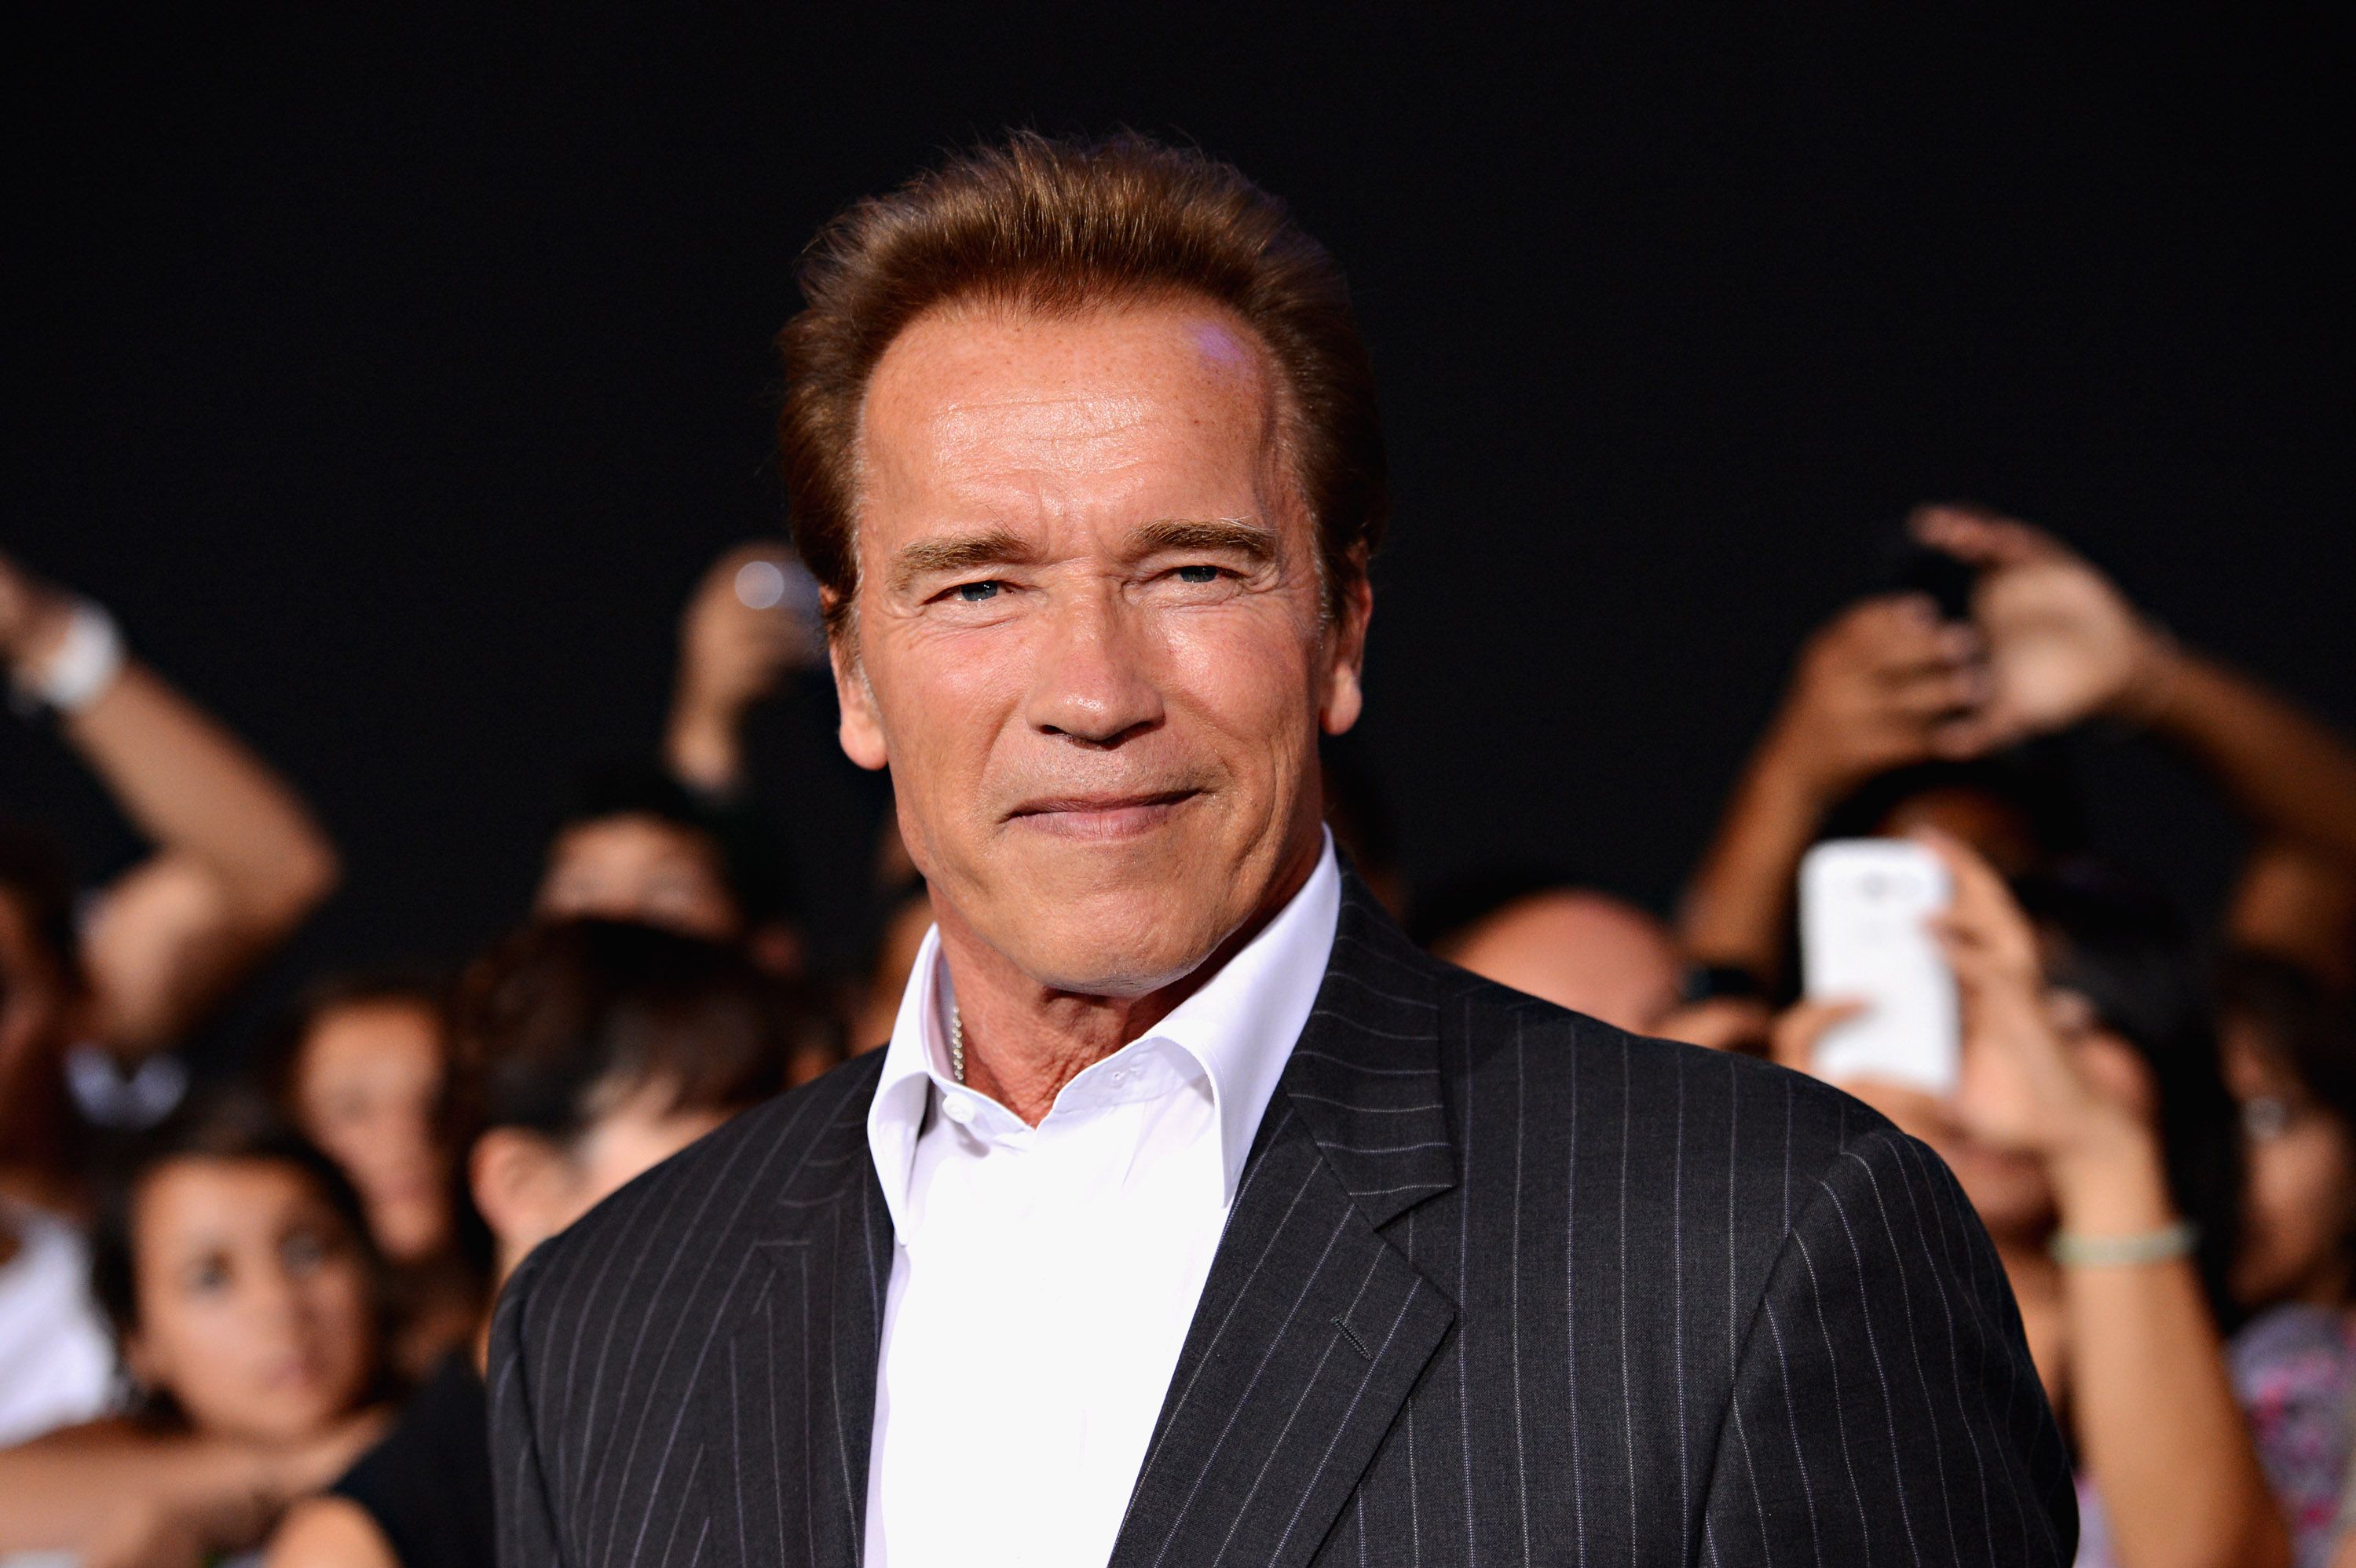 Arnold Schwarzenegger at Lionsgate Films' "The Expendables 2" premiere on August 15, 2012, in Hollywood, California | Photo: Jason Merritt/Getty Images